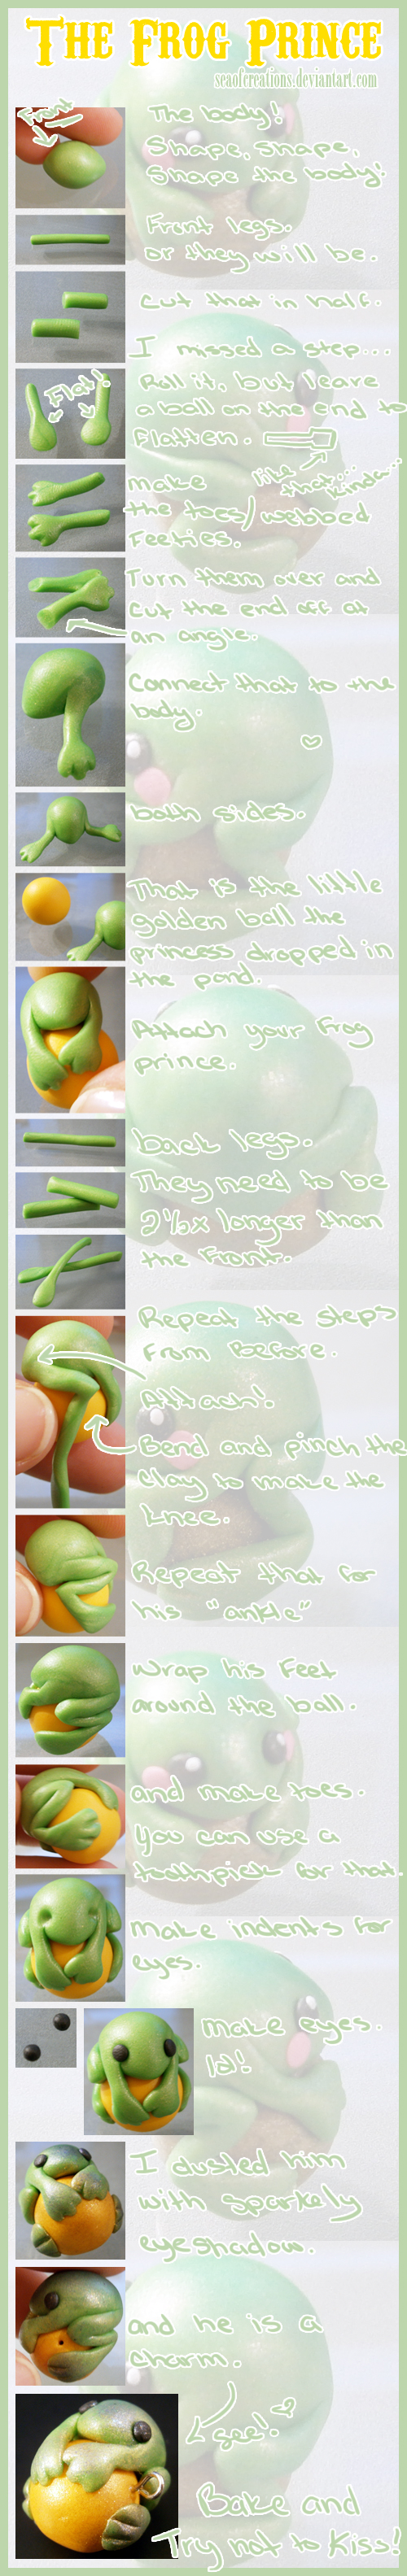 the_frog_prince_tutorial_by_seaofcreations-d4wo97s.jpg